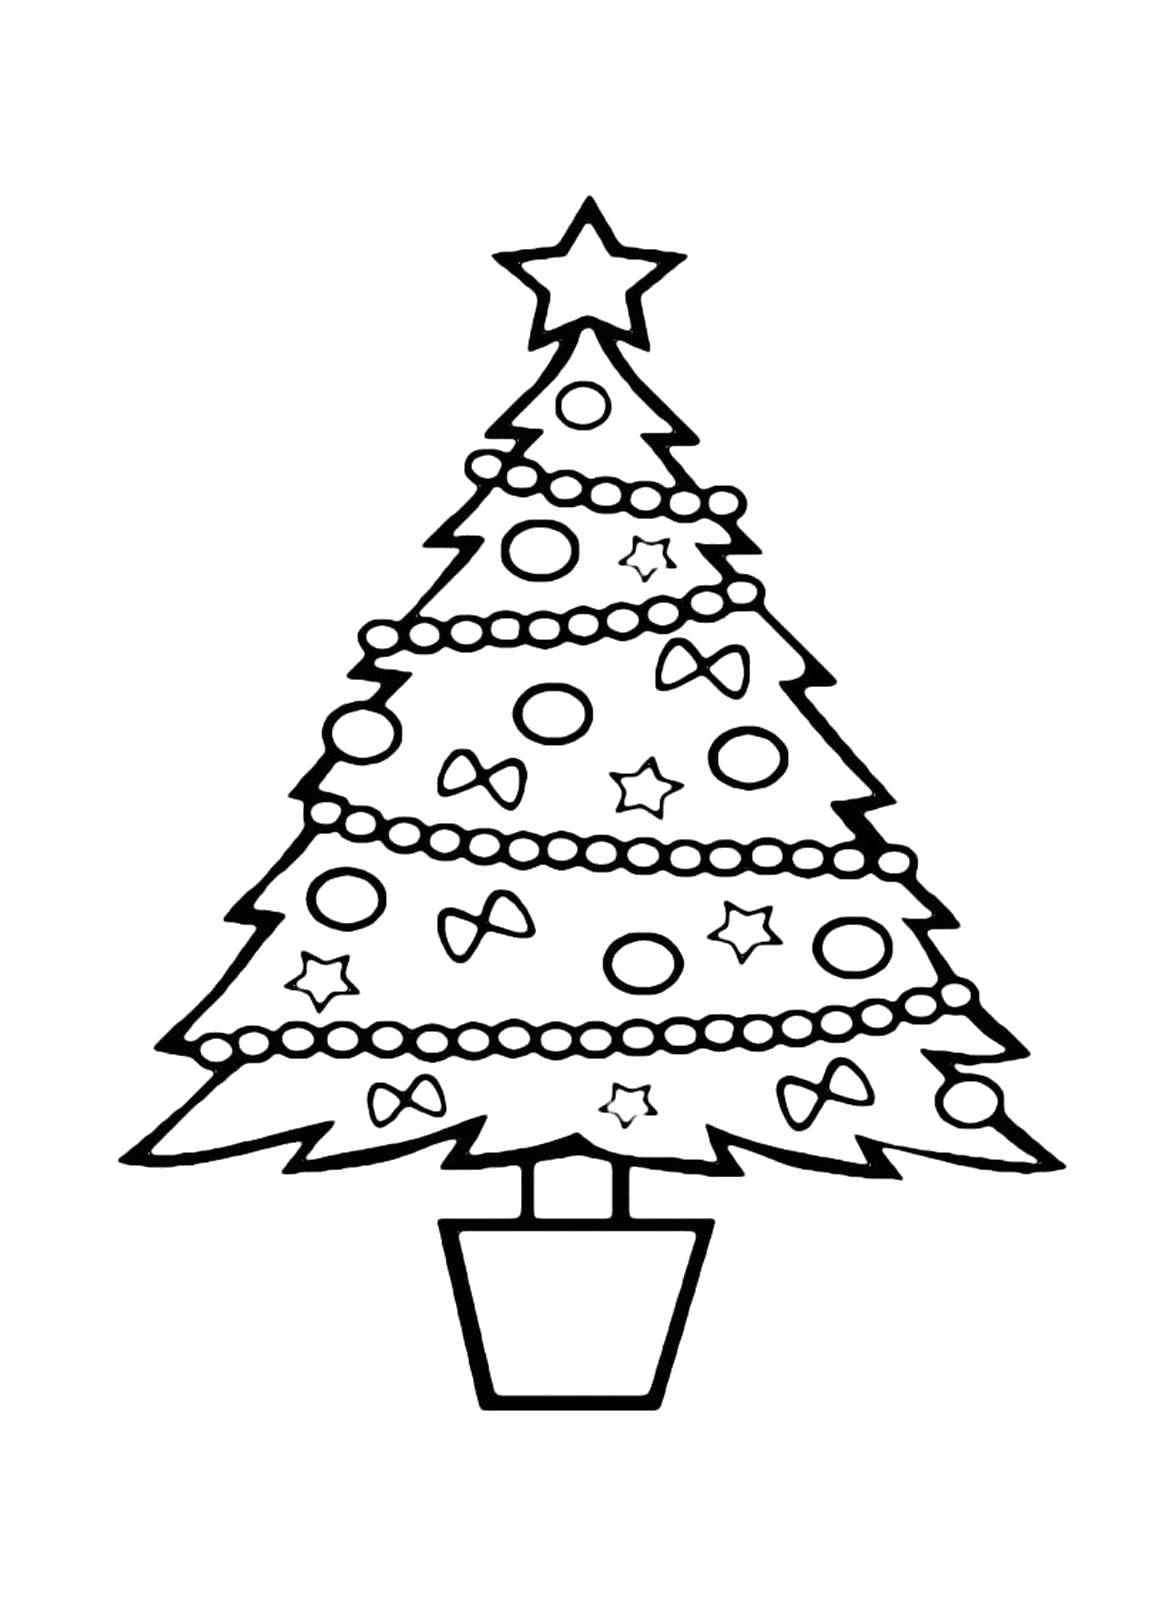 Coloring The tree. Category coloring Christmas tree. Tags:  New Year, tree, gifts, toys.